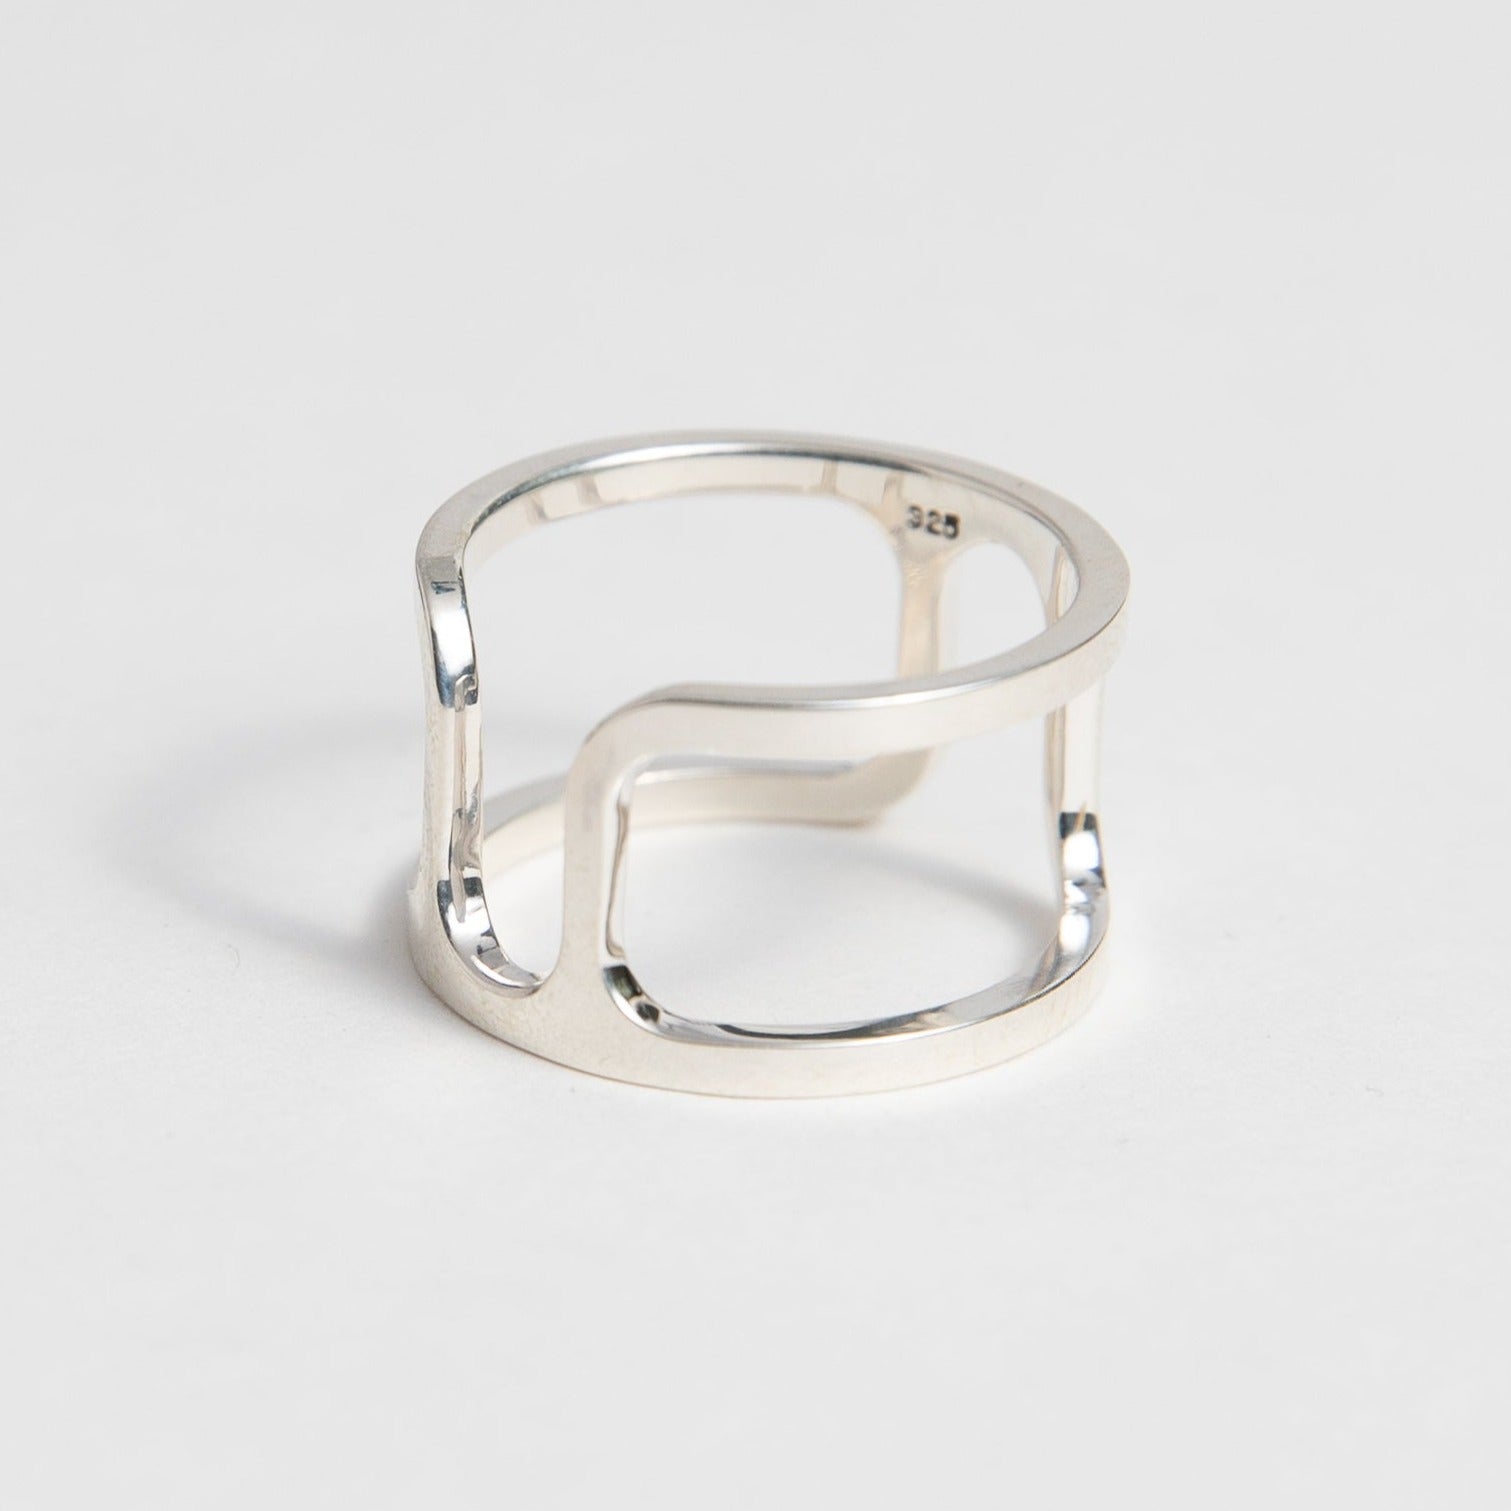 Coteri Cool Ring in sterling silver by SHW Fine Jewelry New York City